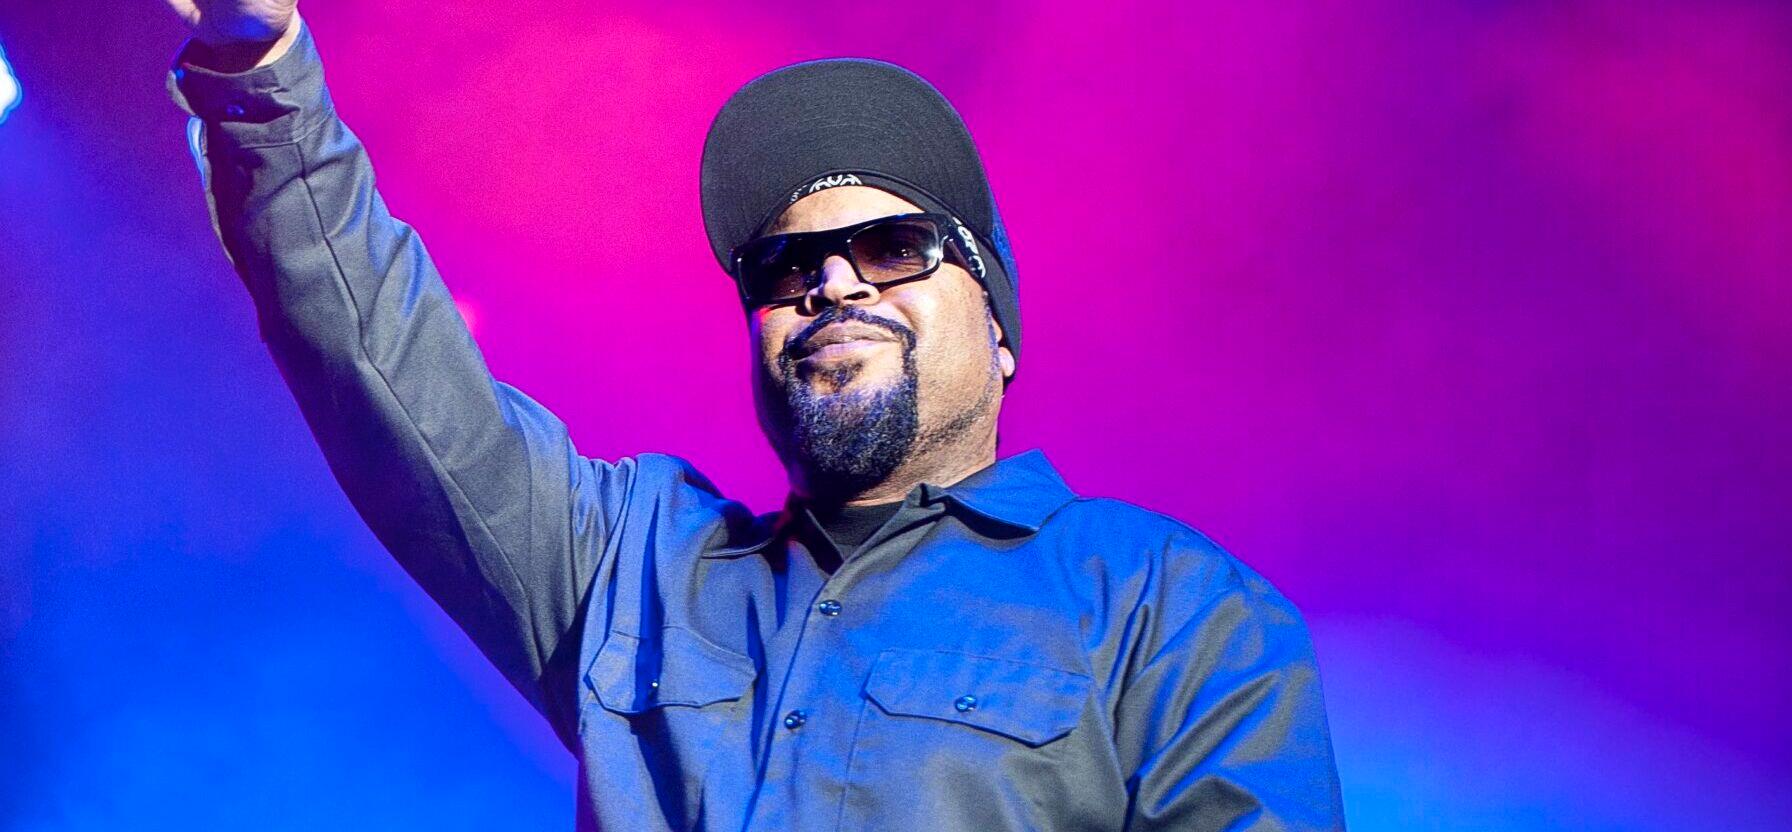 Is The NBA Trying To Kill Ice Cube’s Big3 Basketball League?